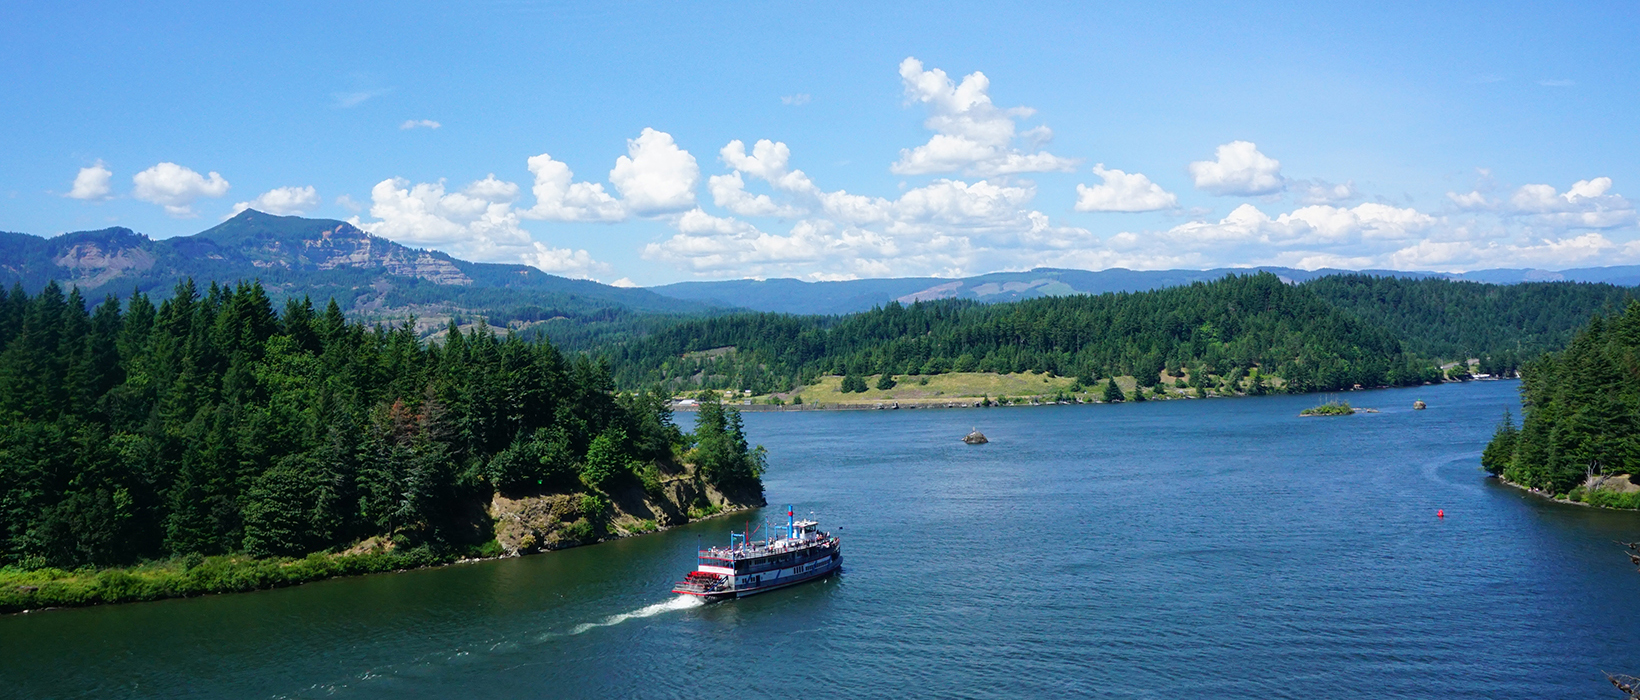 columbia river gorge sightseeing cruise